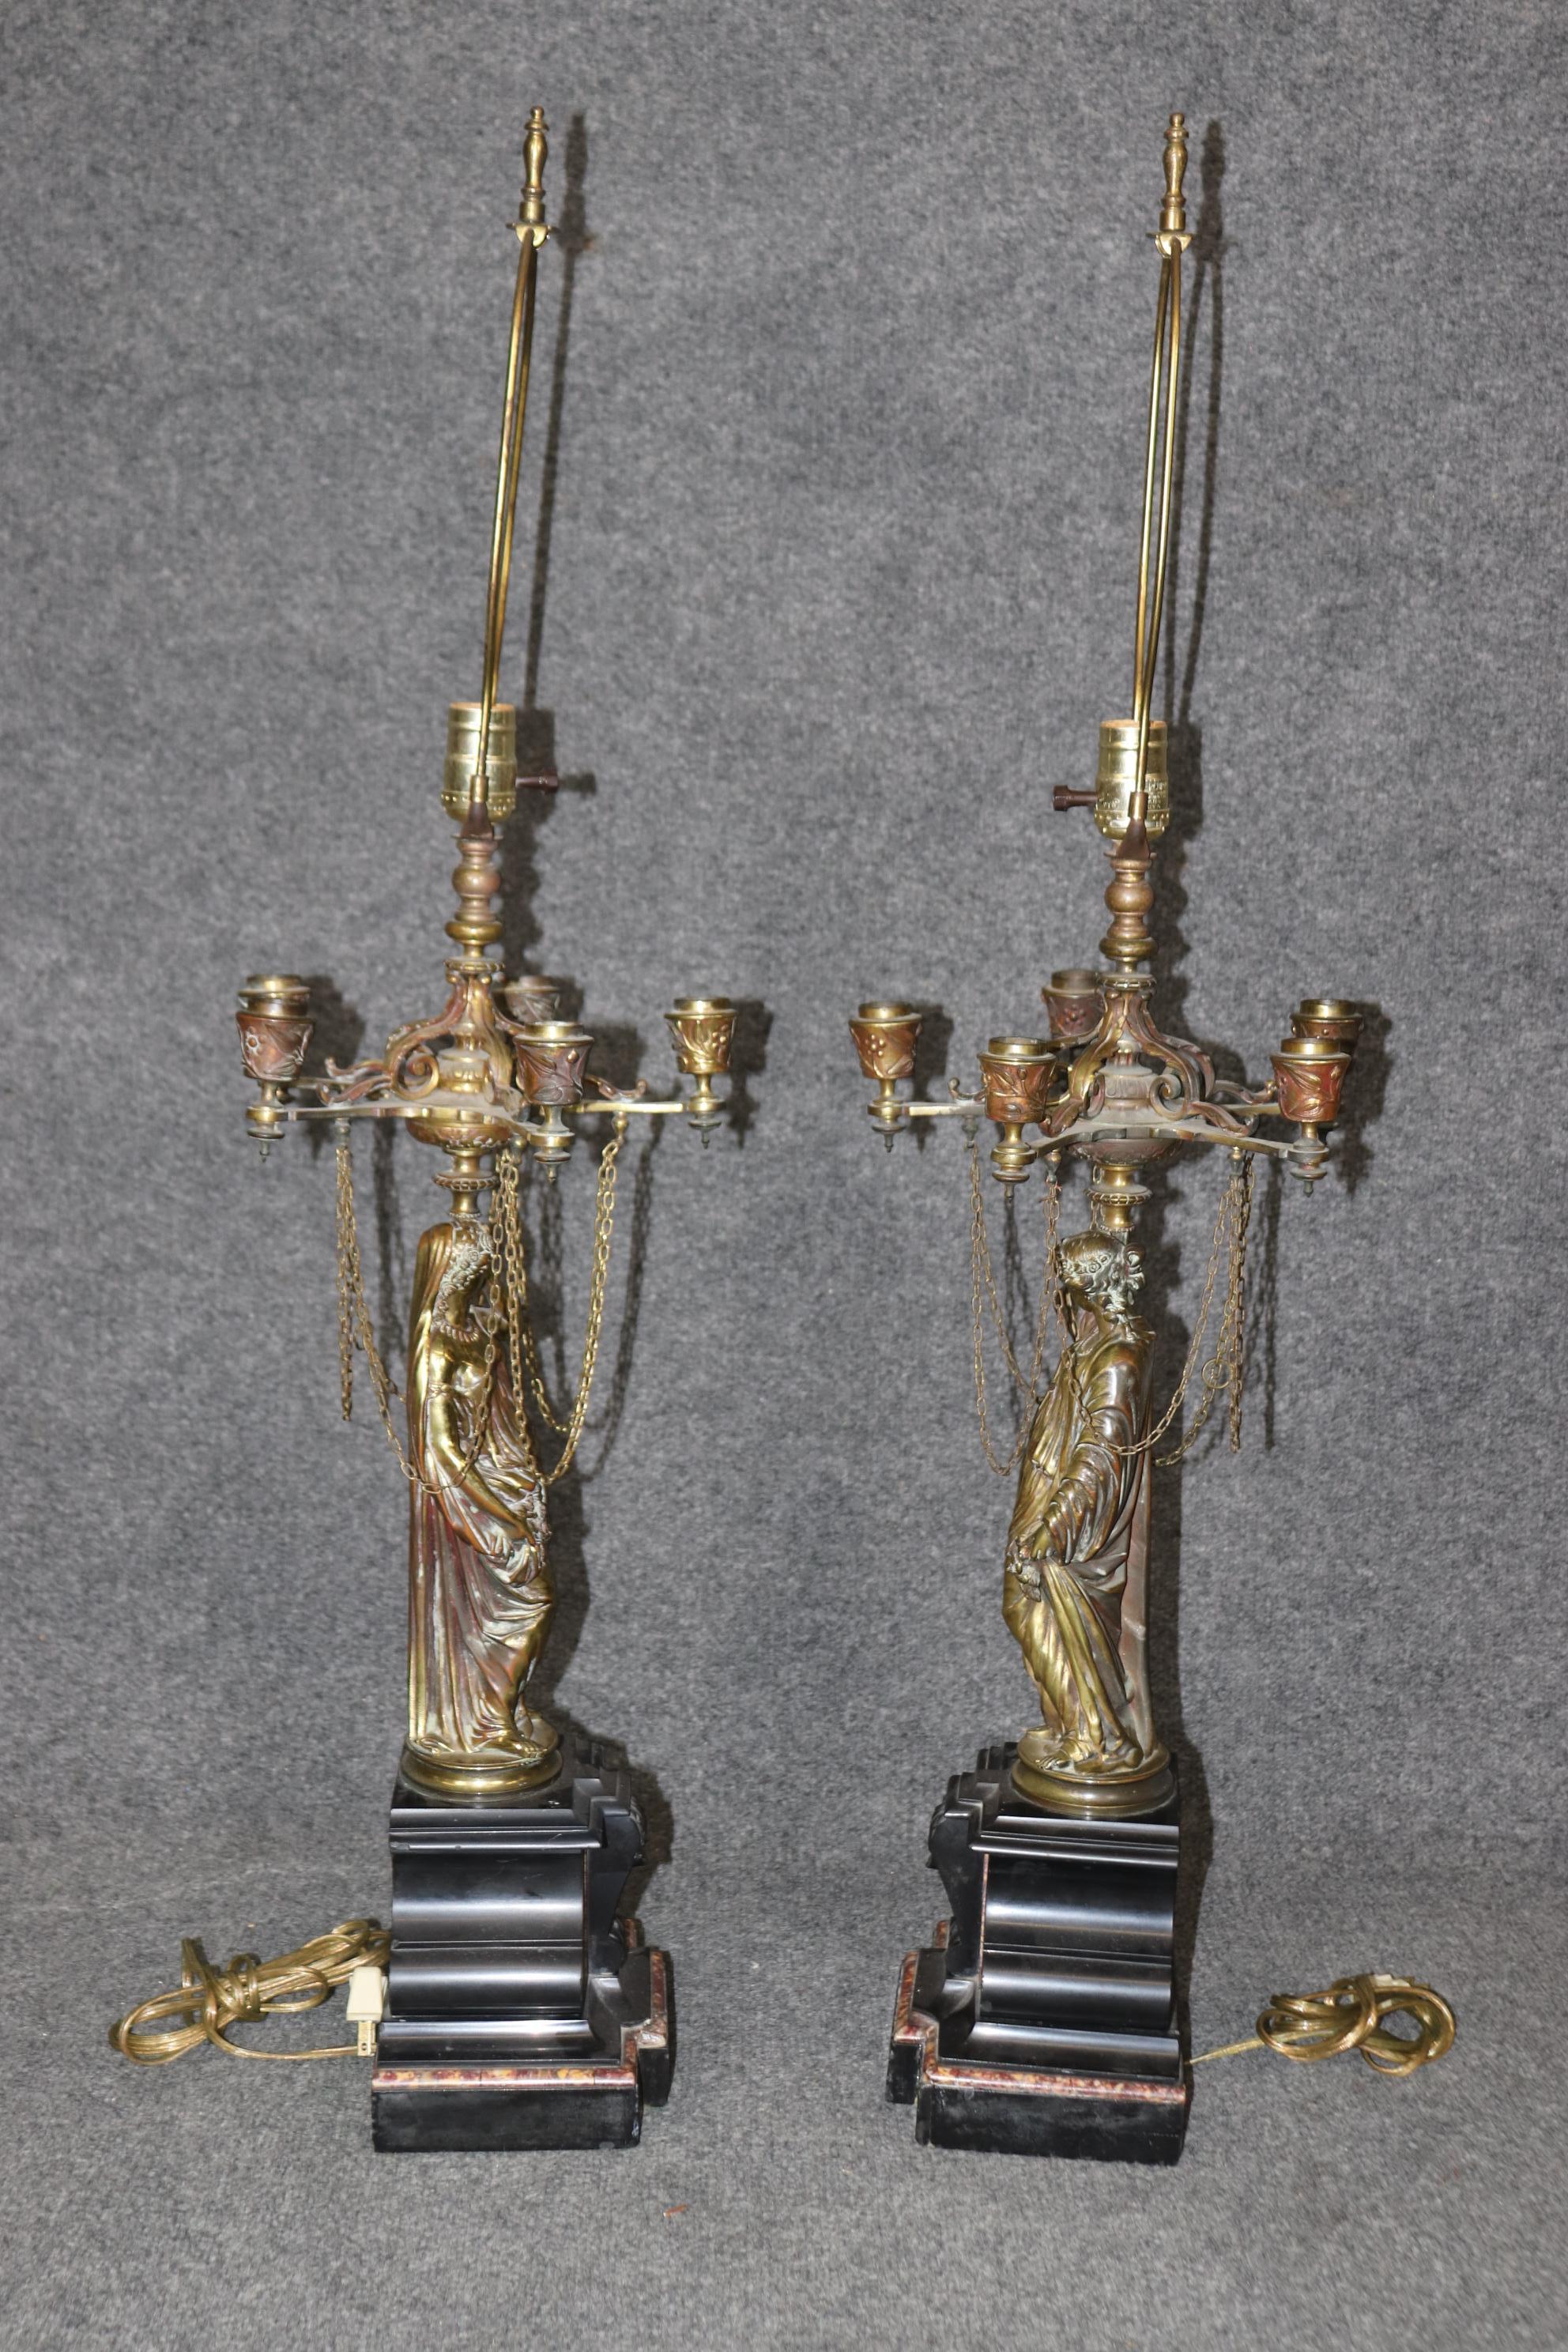 This is a fantastic pair of lamps depicting draped robed women with chains holding up a 5-light array for each lamp. The pair is in good original condition. The pair is perhaps not politically correct, but the quality of the casting and marble base